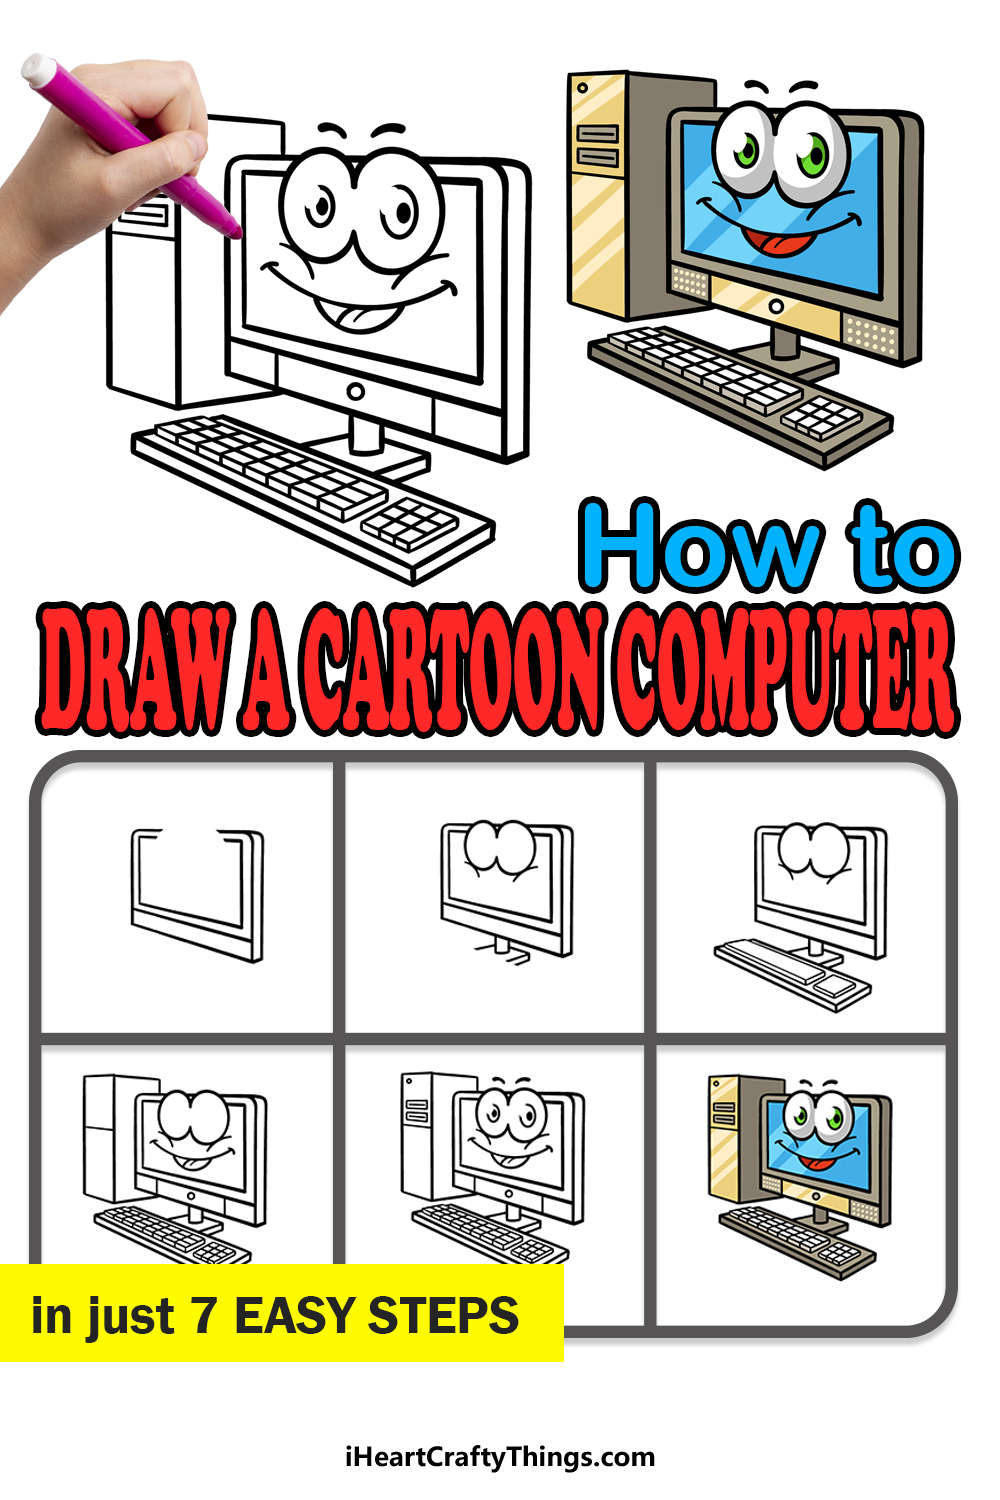 how to draw a cartoon computer in 7 easy steps